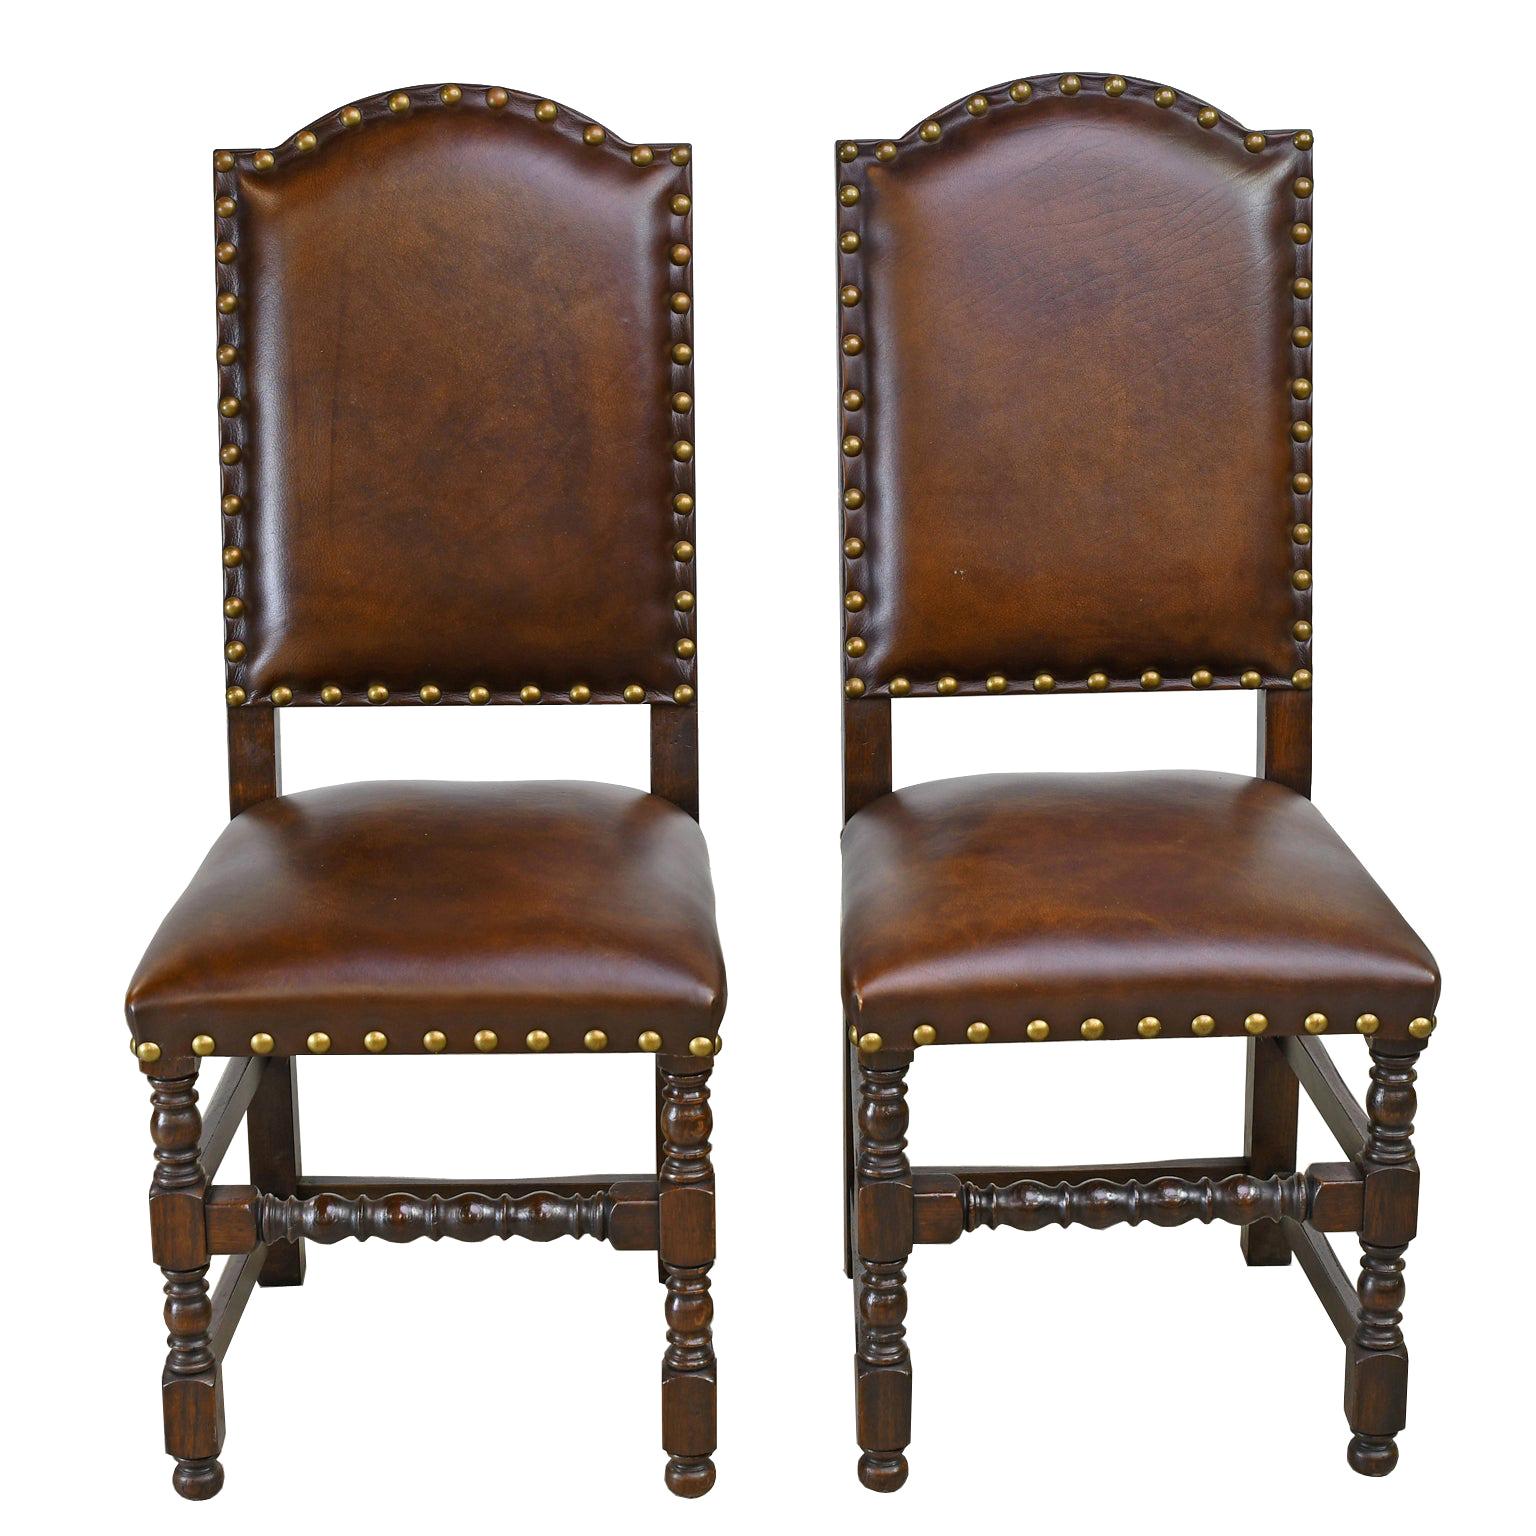 Pair of Jacobean Style Oak Dining Chairs with Leather Upholstery, Belgium